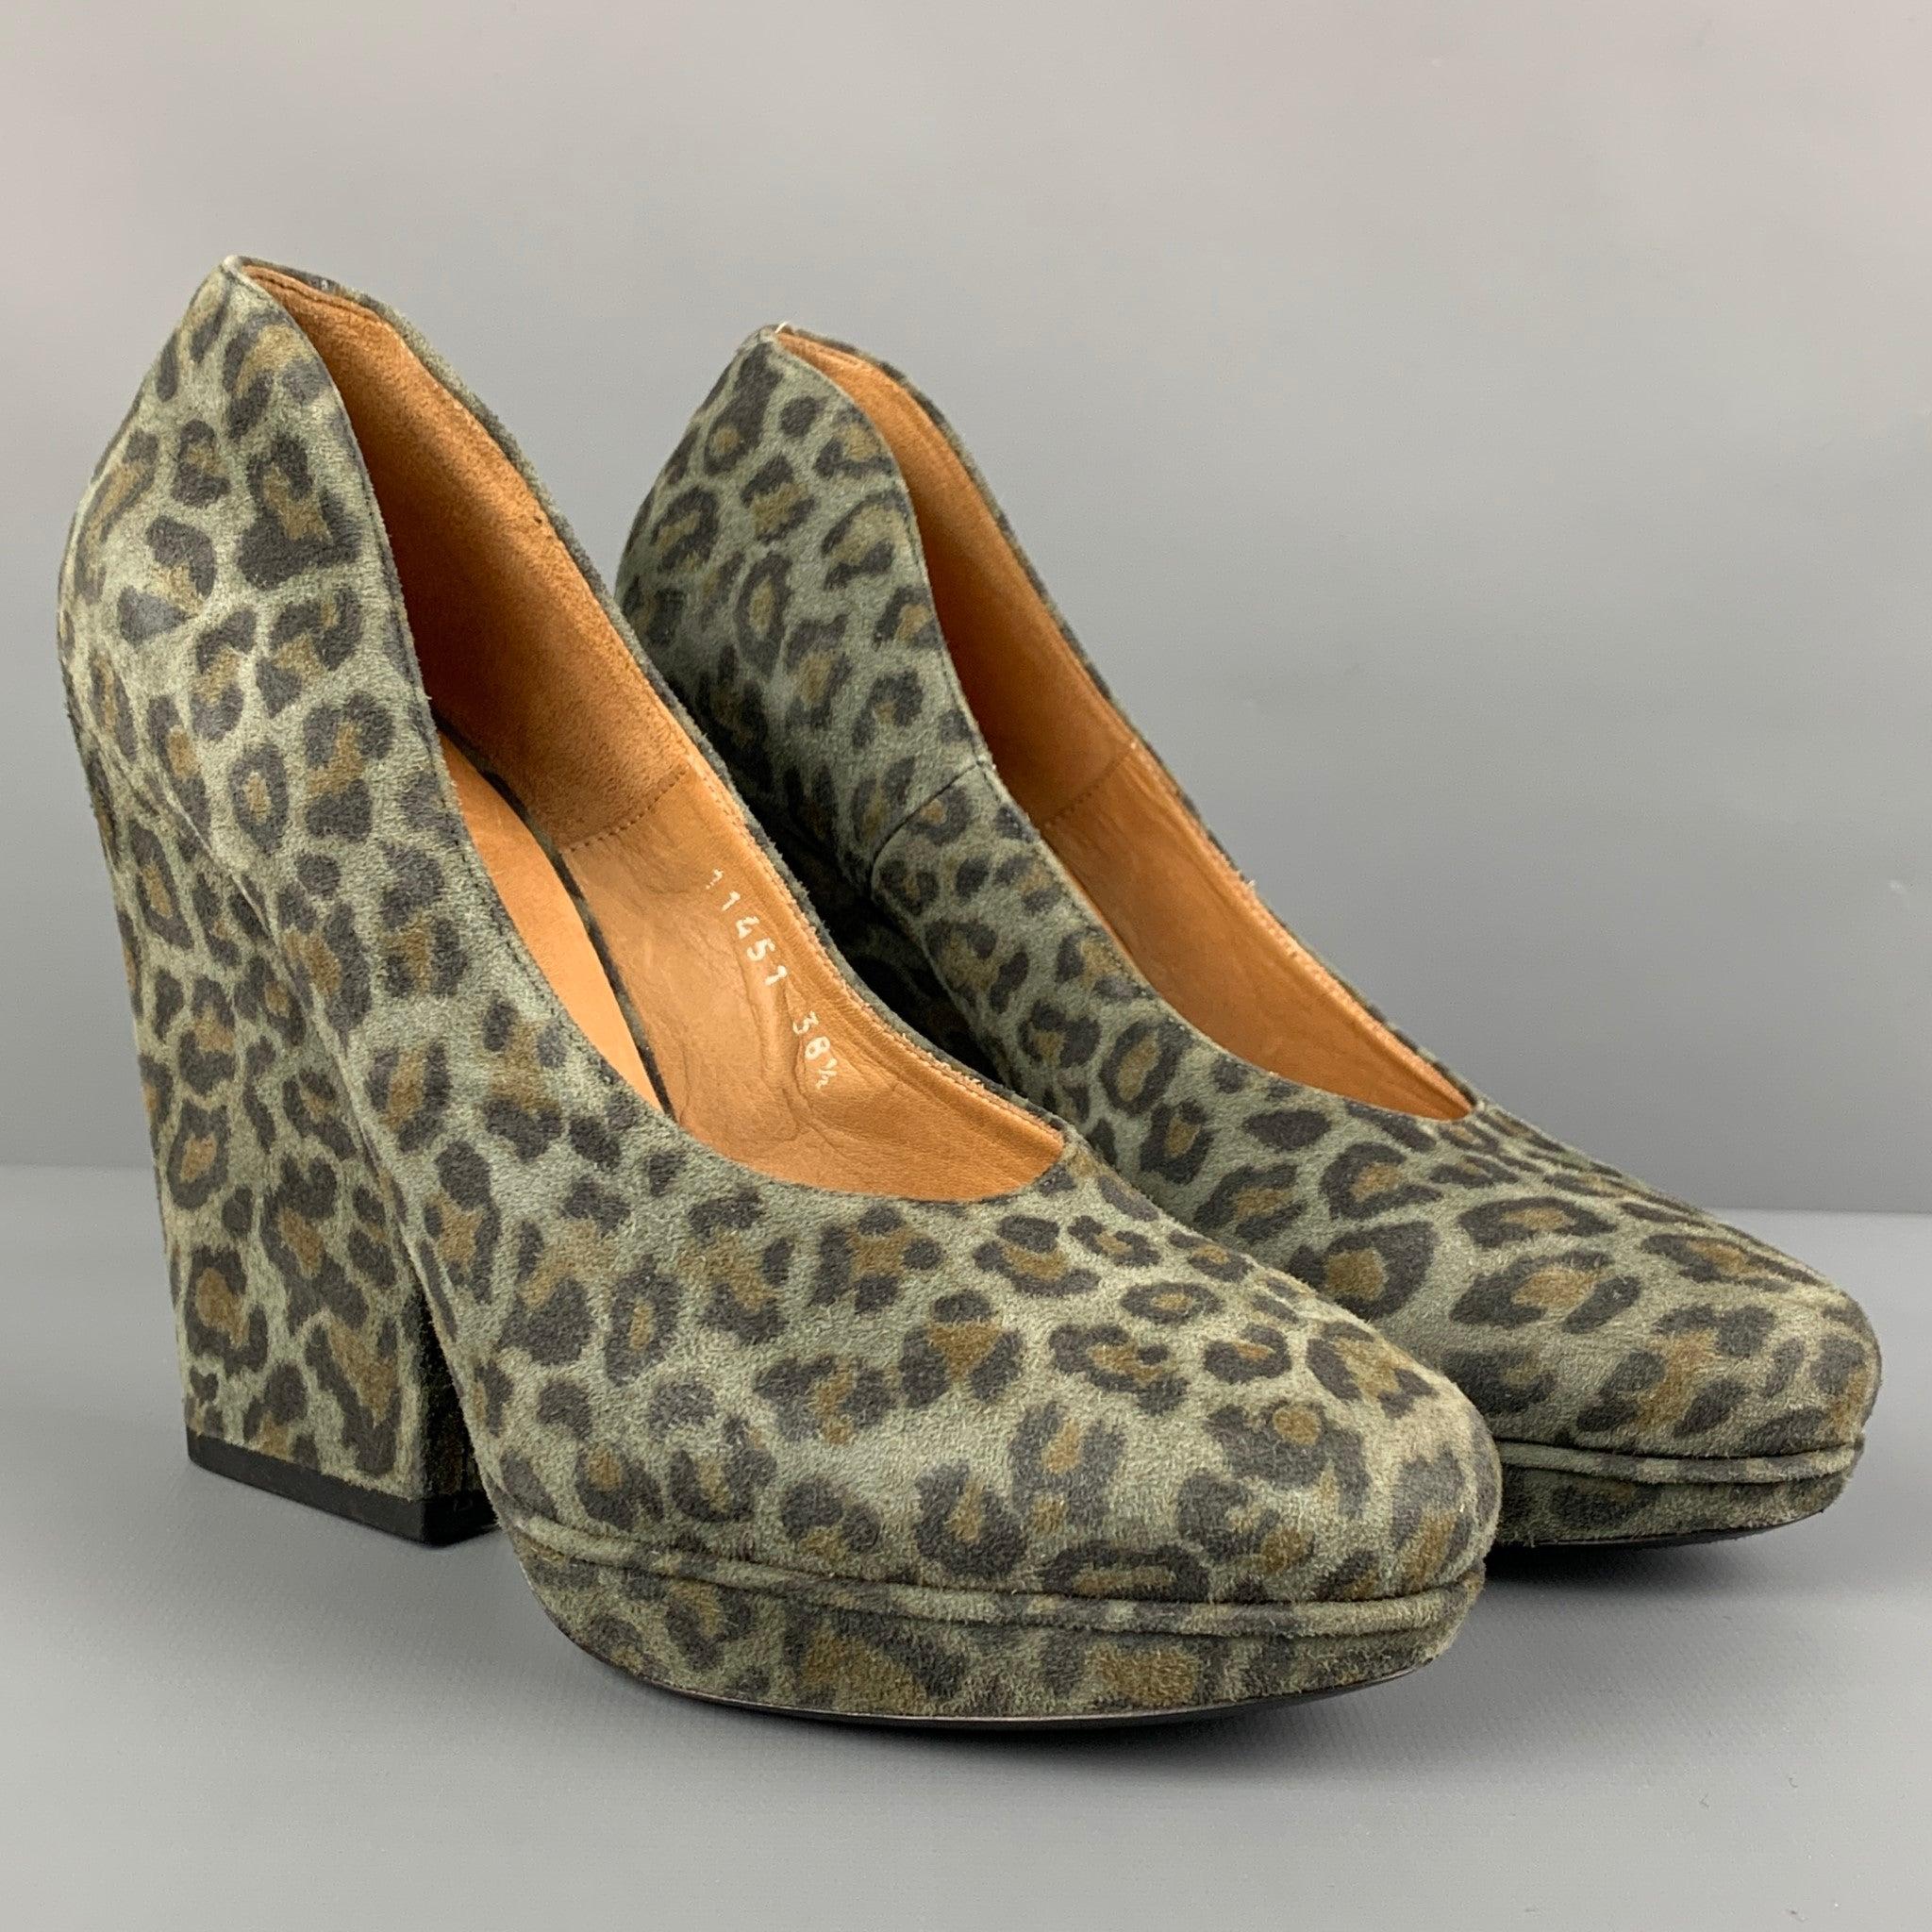 DRIES VAN NOTEN pumps comes in a moss & brown animal print featuring a platform and a chunky heel. Made in Italy.
Very Good
Pre-Owned Condition. 

Marked:  
 11451 38.5 

Measurements: 
  Heel: 4.5 inches  Platform: 0.5 inches 
  
  
 
Reference: